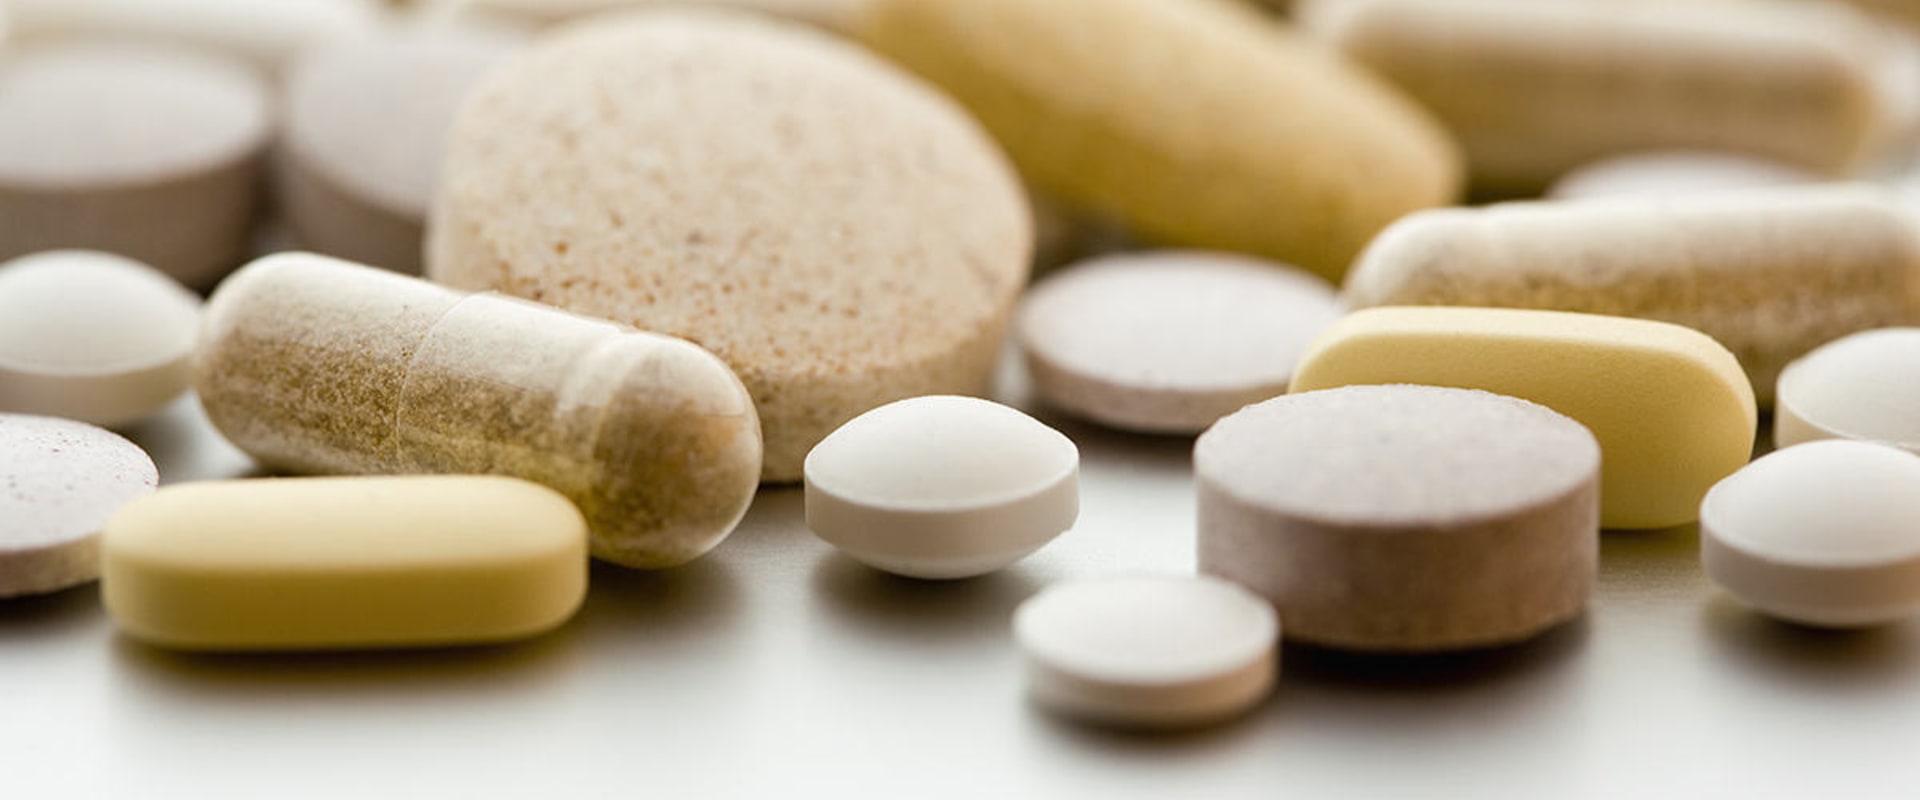 Do you need to see a doctor before taking vitamins?